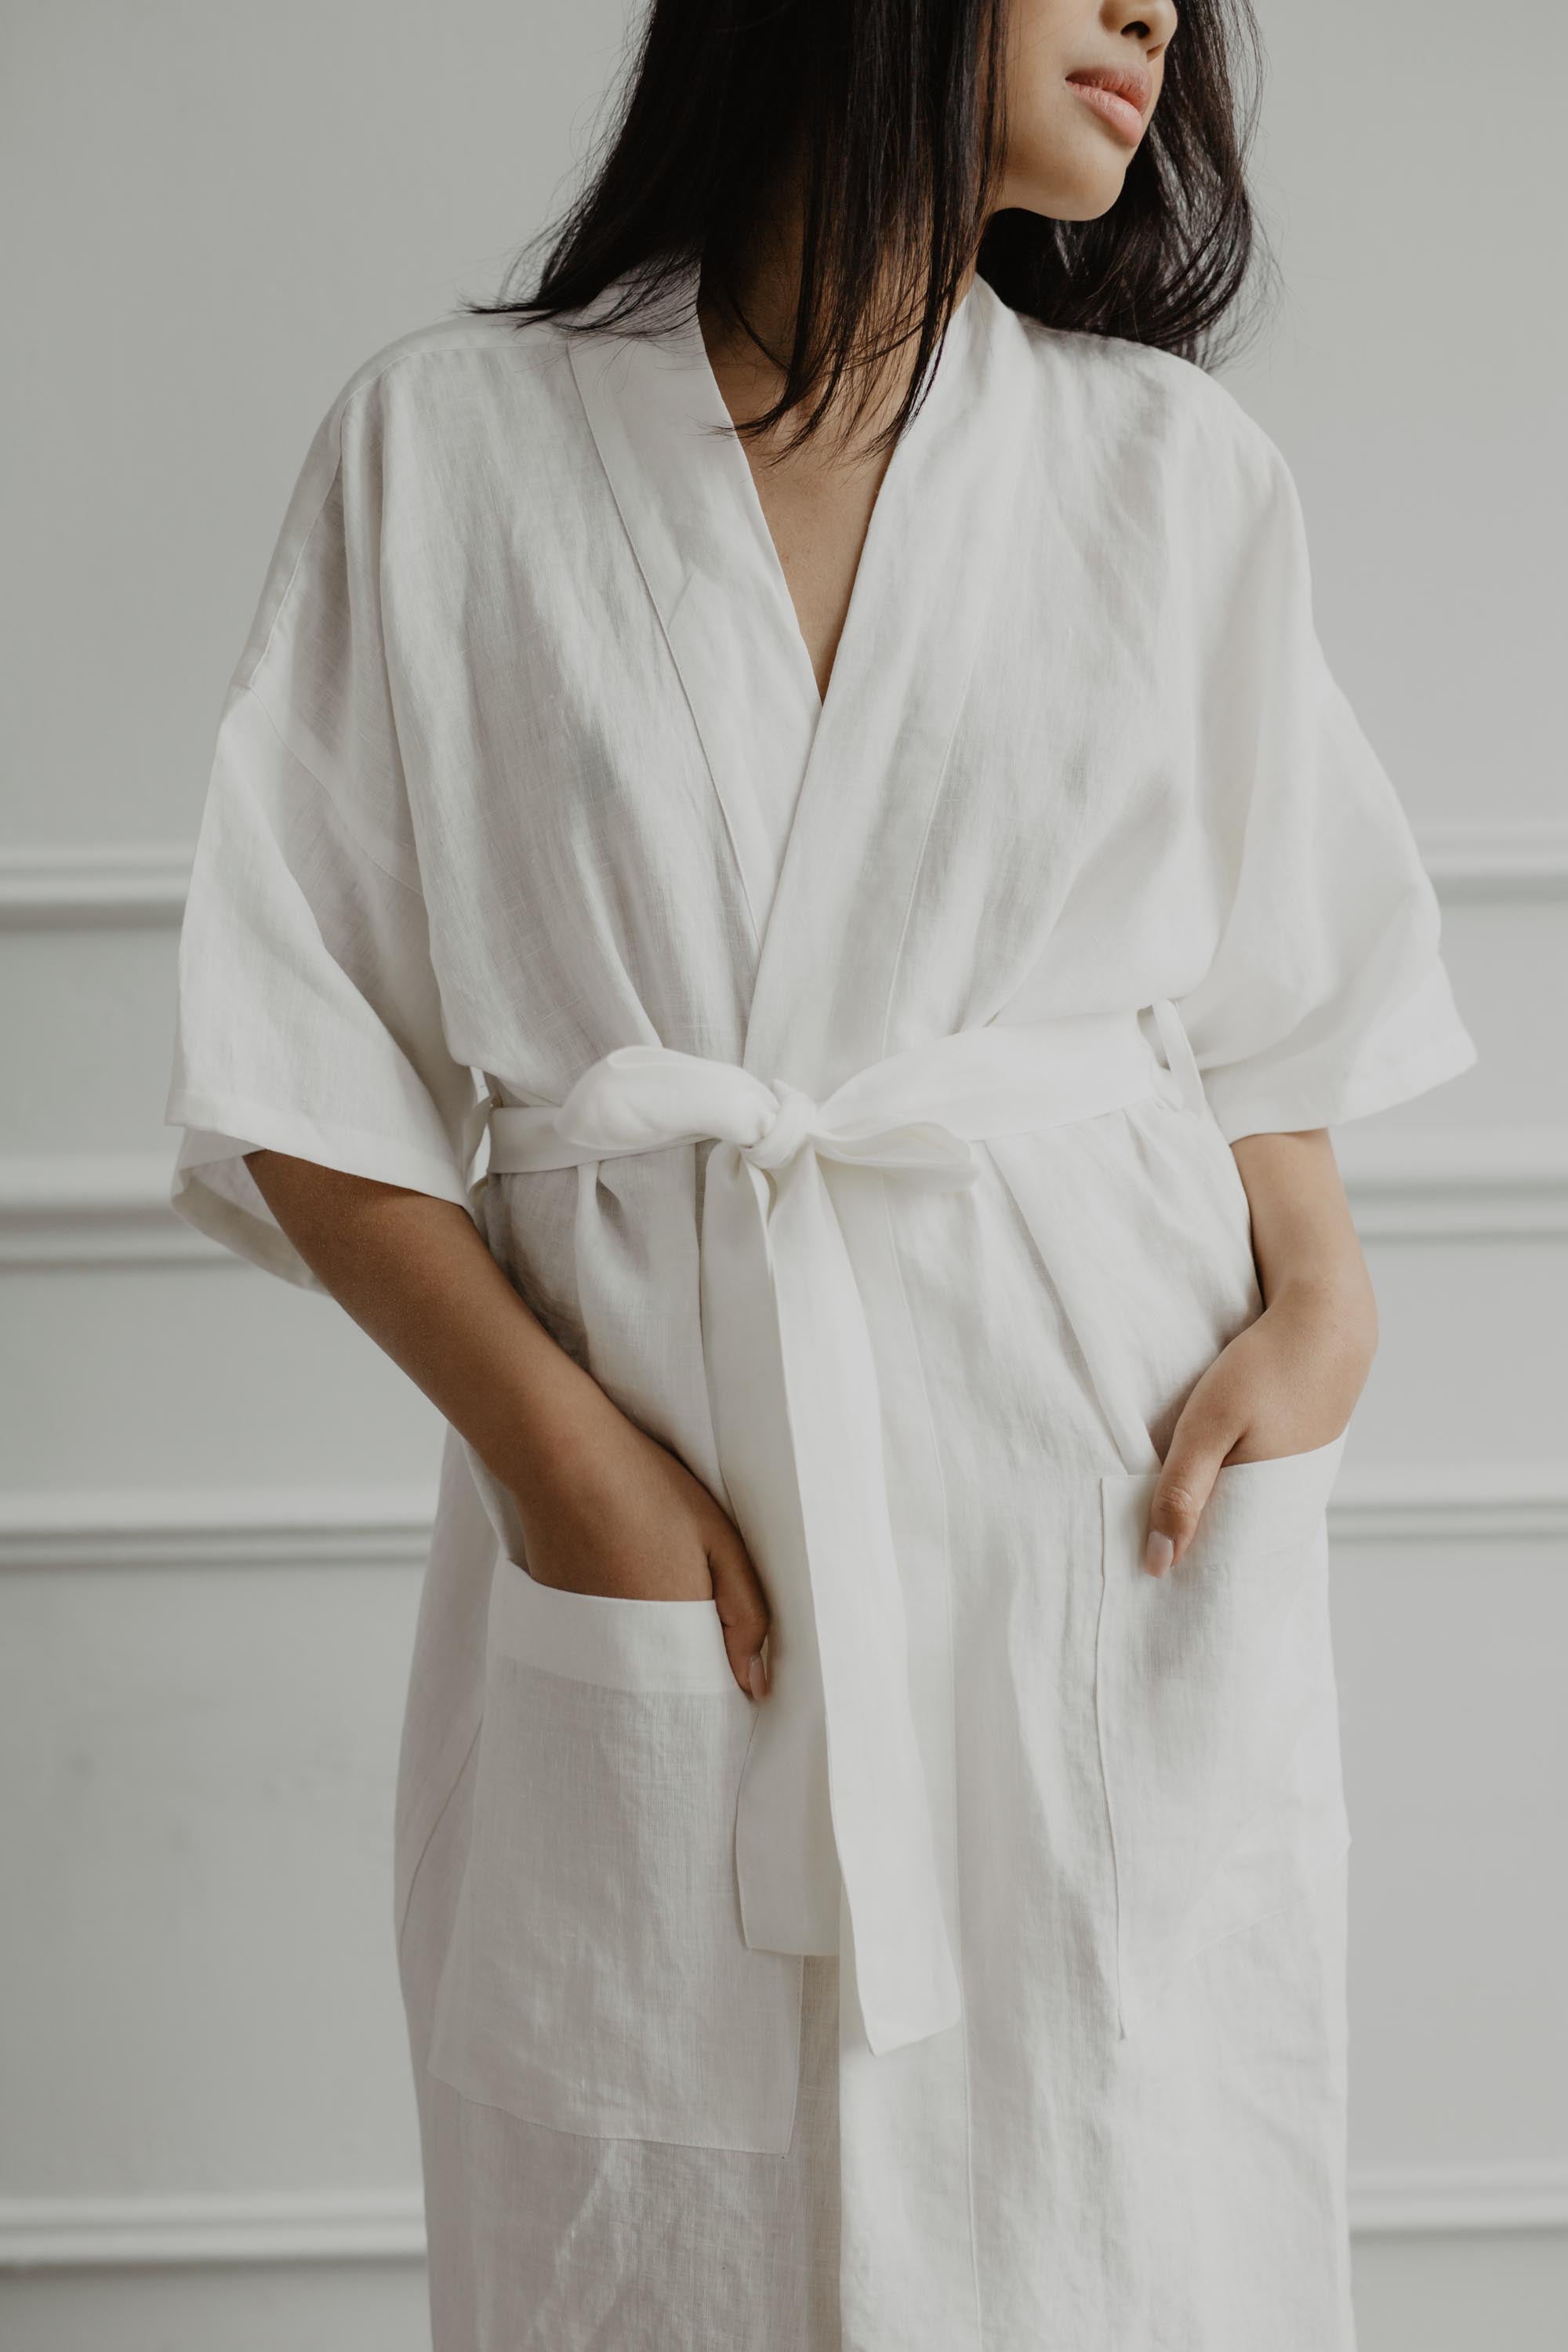 Close Up Of Woman Wearing A White Linen Brahrobe By AmourLinen